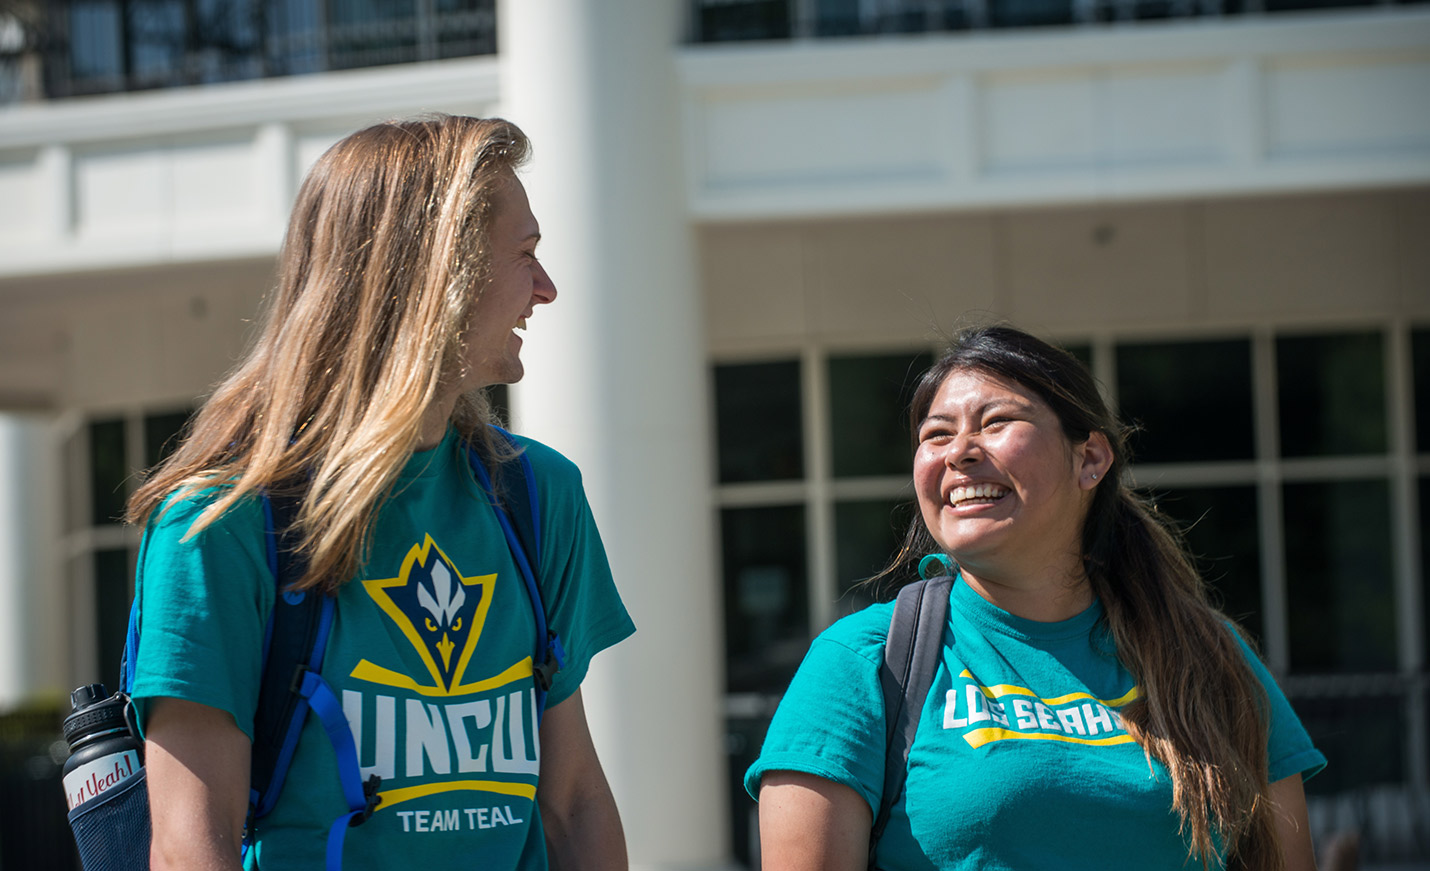 Two women in UNCW Team Teal T-shirts share a laugh